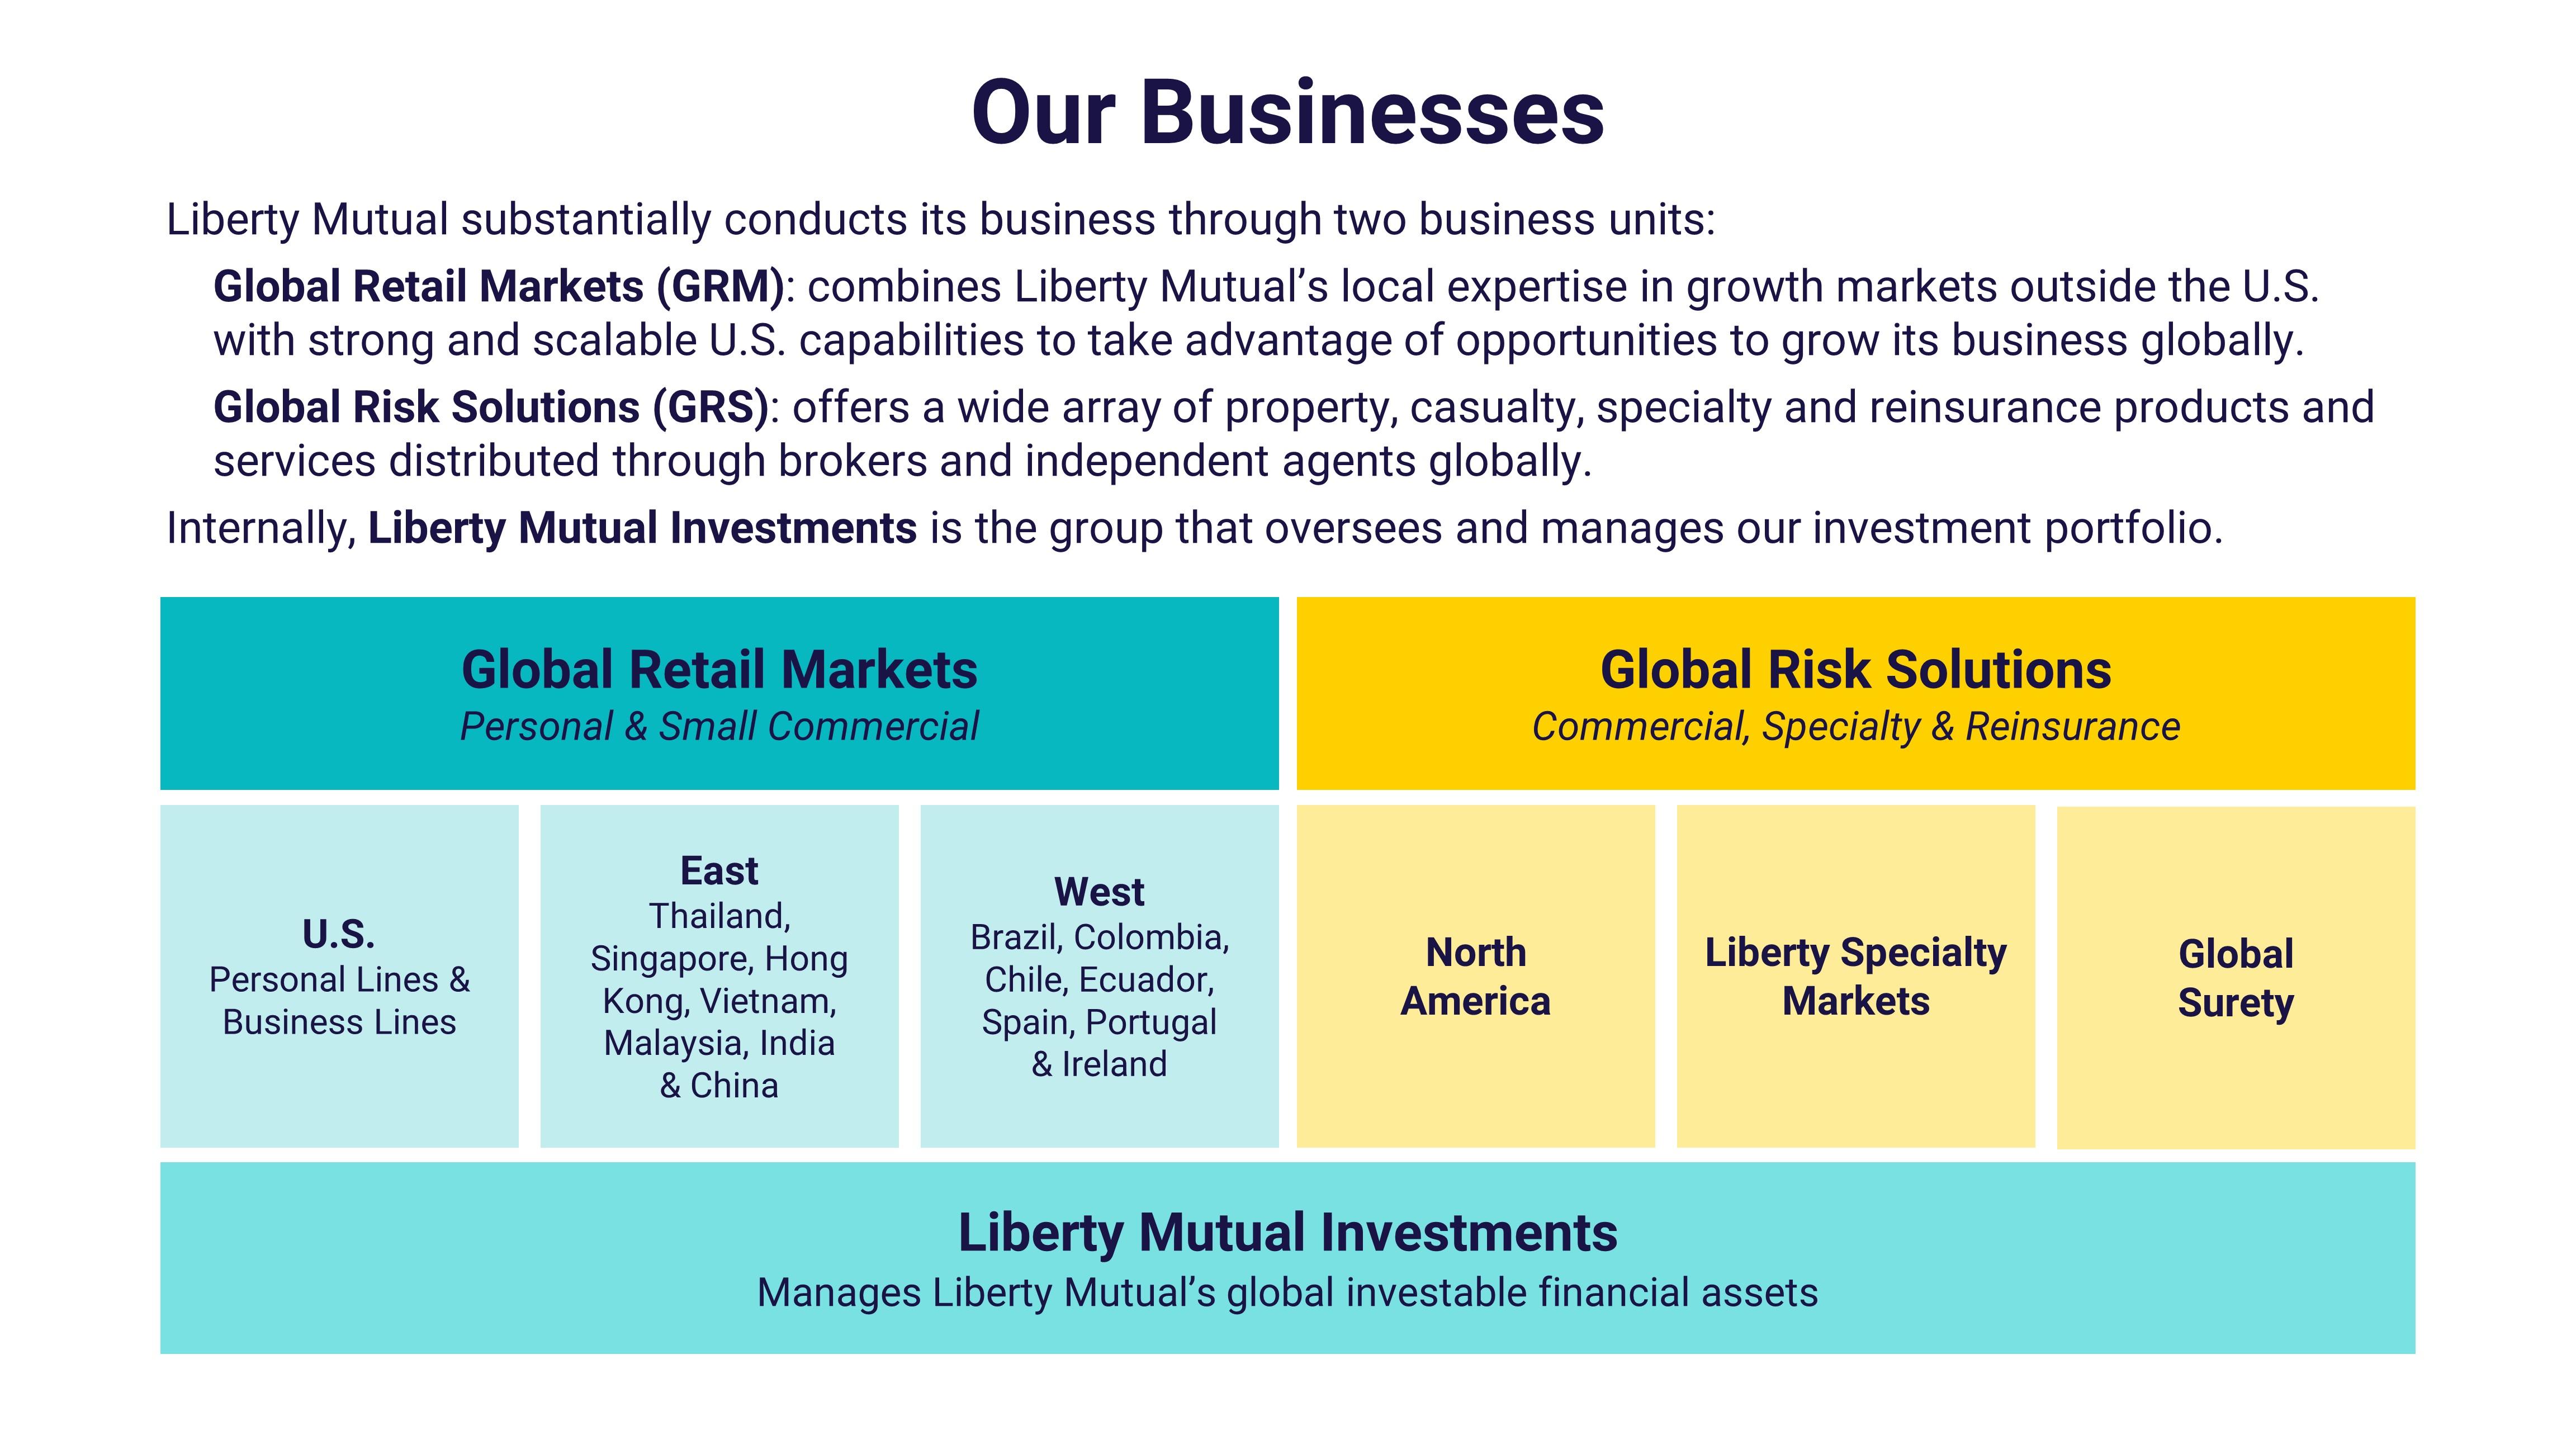 (slide 2 of 3) A chart showing Liberty Mutual's business structure. Liberty Mutual substantially conducts its business through two business units: Global Retail Markets (GRM) which includes U.S., East and West; and Global Risk Solutions (GRS) which includes North America, Liberty Specialty Markets and Global Surety. Internally, Liberty Mutual Investments is the group that oversees and manages our investment portfolio.. 